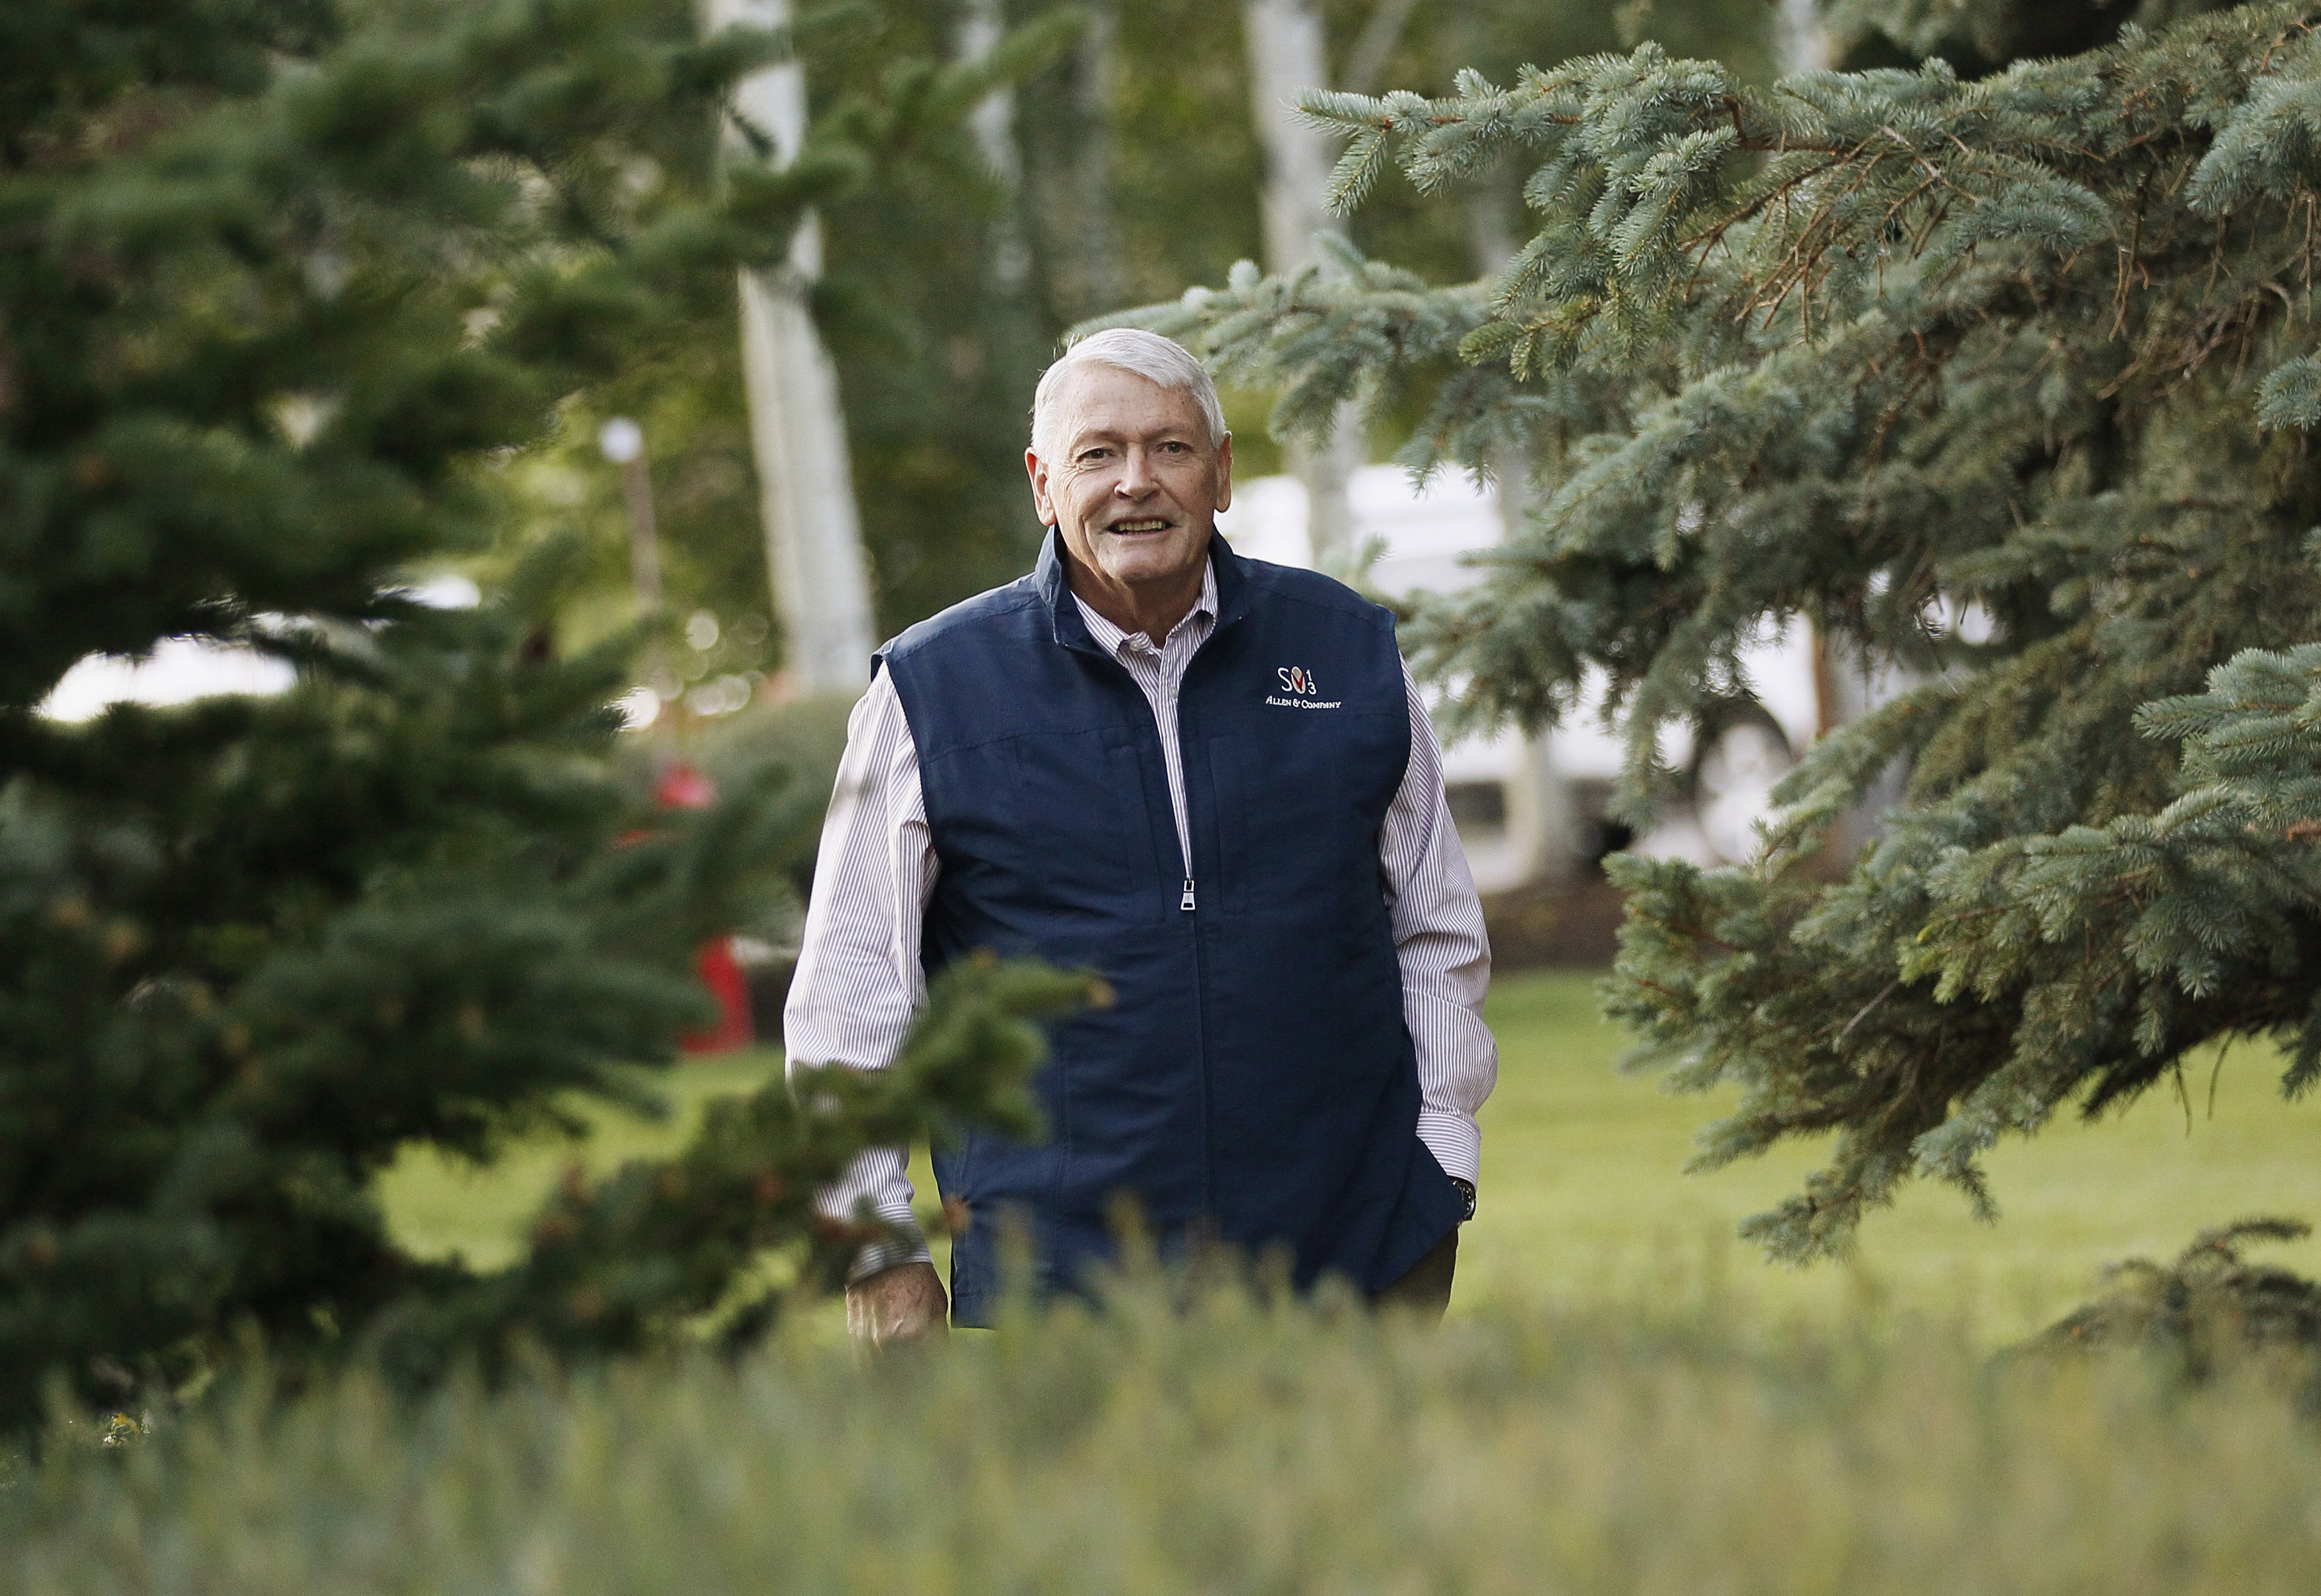 Liberty Media Corp. chairman John Malone arrives at the annual Allen and Co. conference at the Sun Valley, Idaho Resort July 12, 2013.